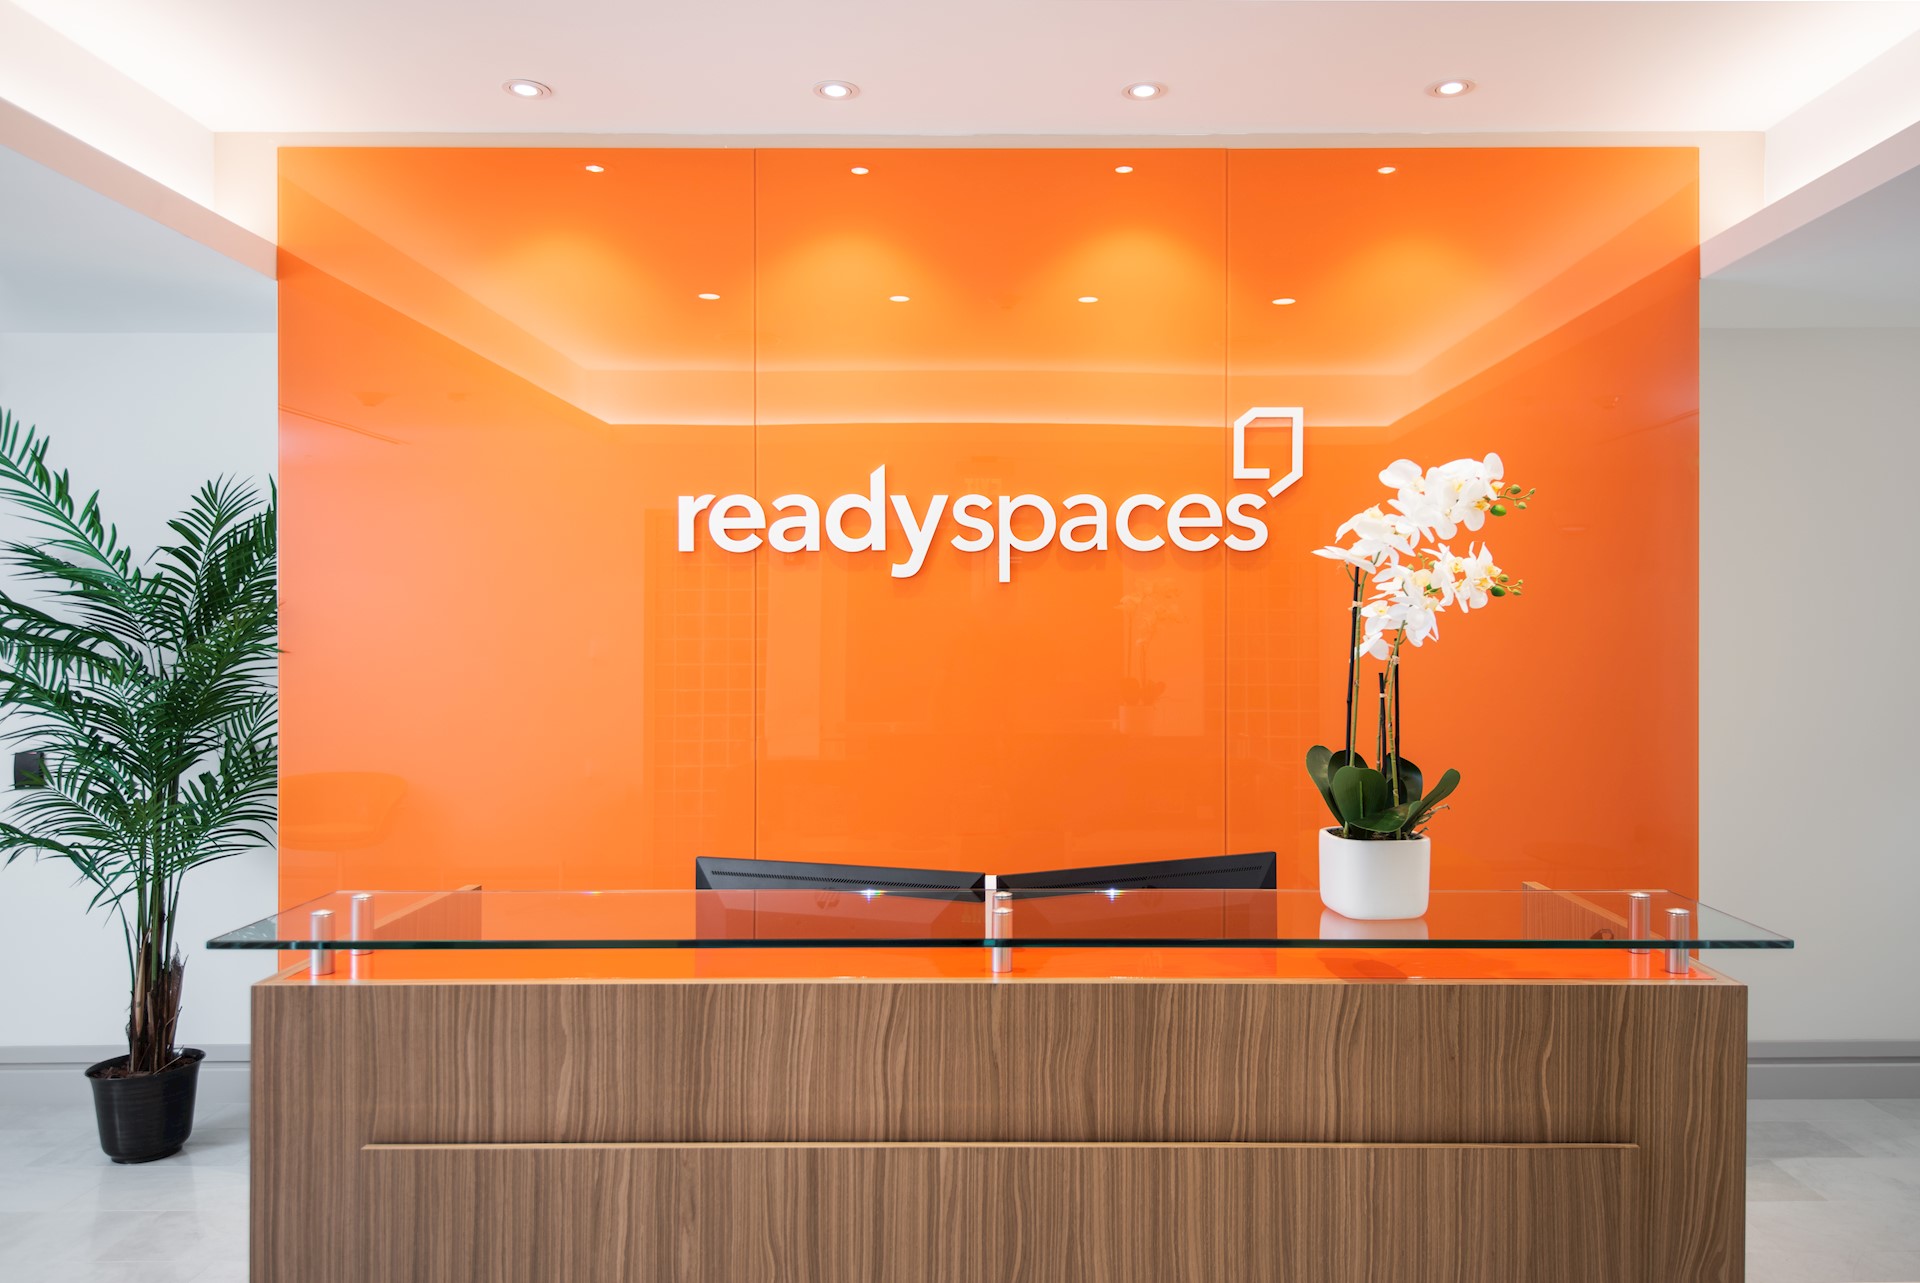 Watch this space: readyspaces